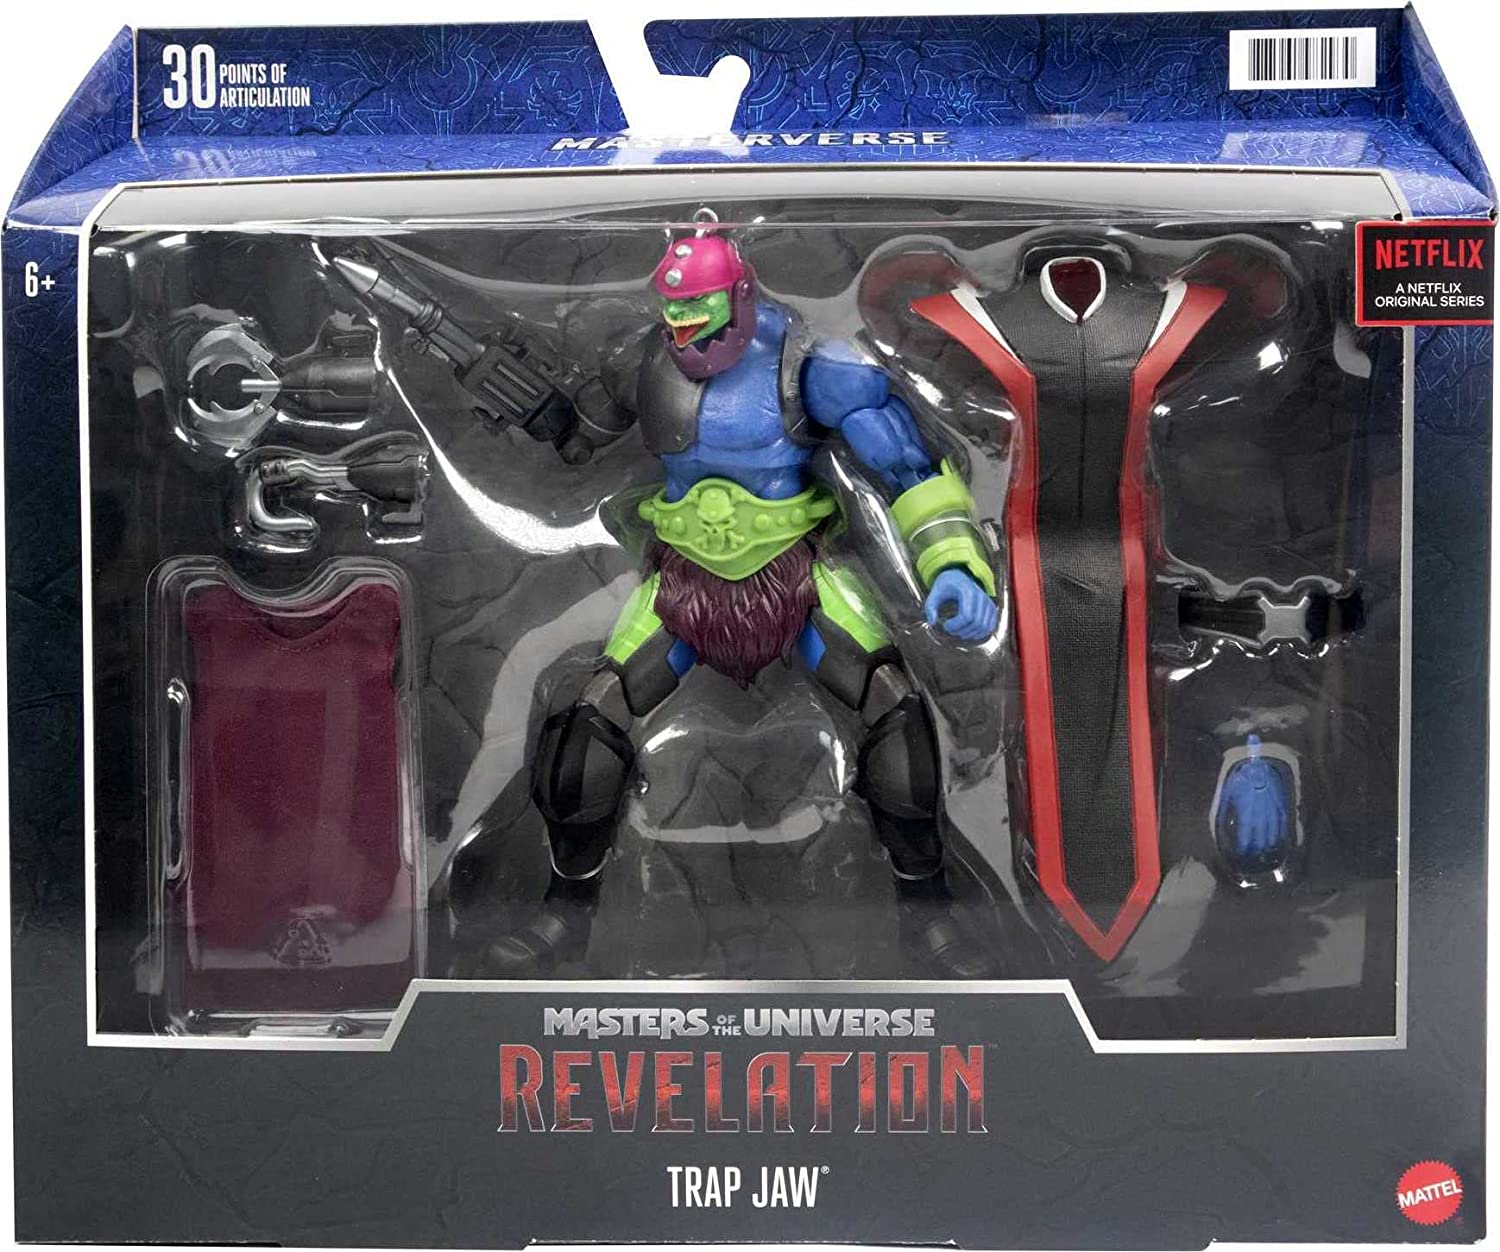 MASTERVERSE DELUXE TRAPJAW